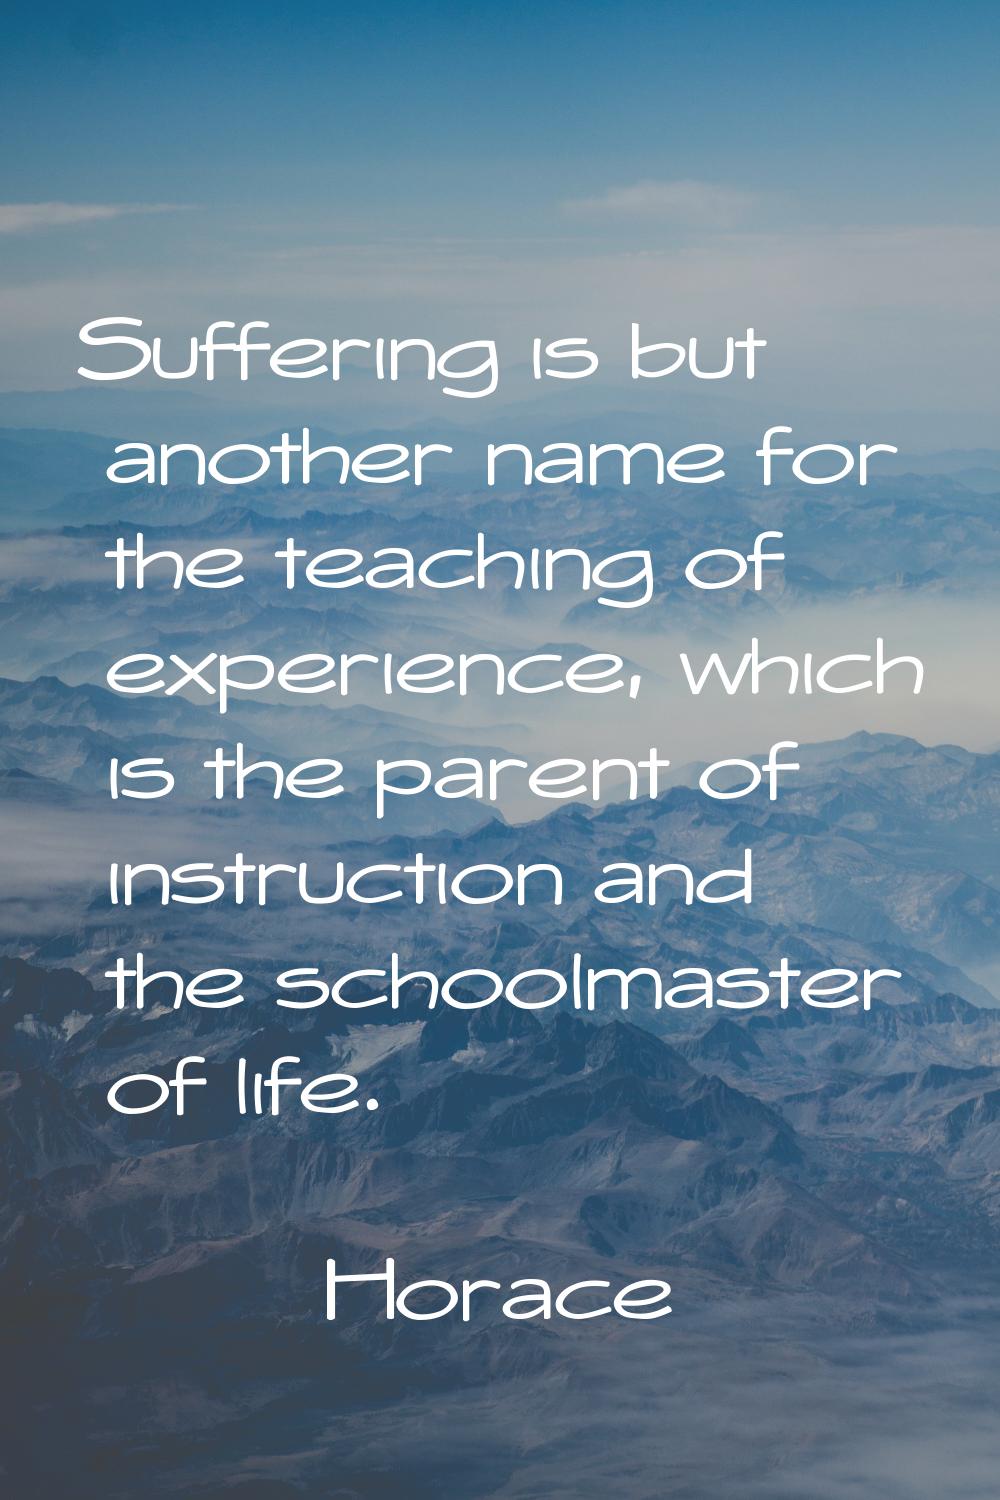 Suffering is but another name for the teaching of experience, which is the parent of instruction an